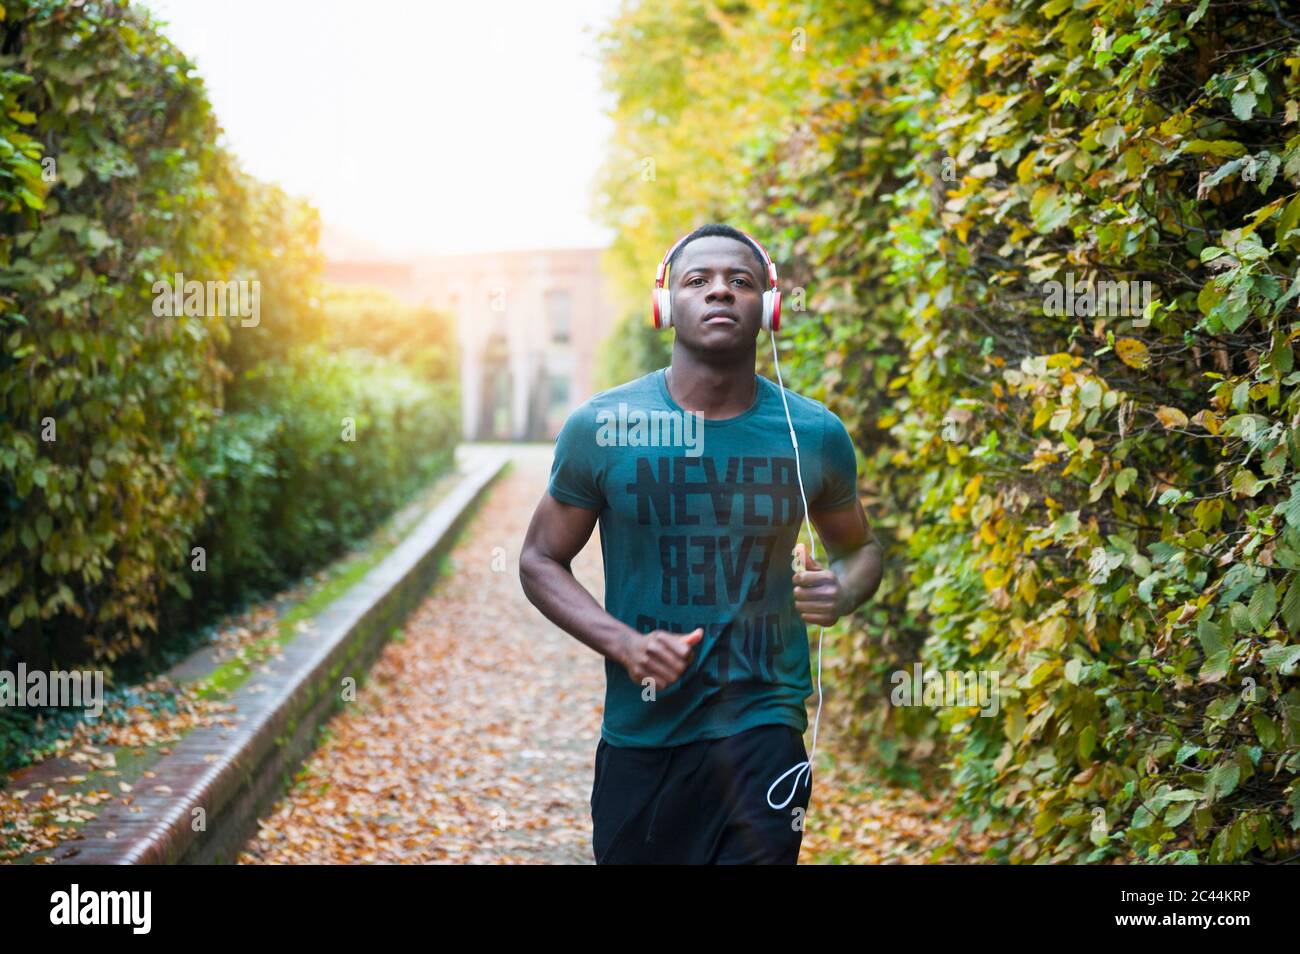 Young man with headphones jogging in park Stock Photo